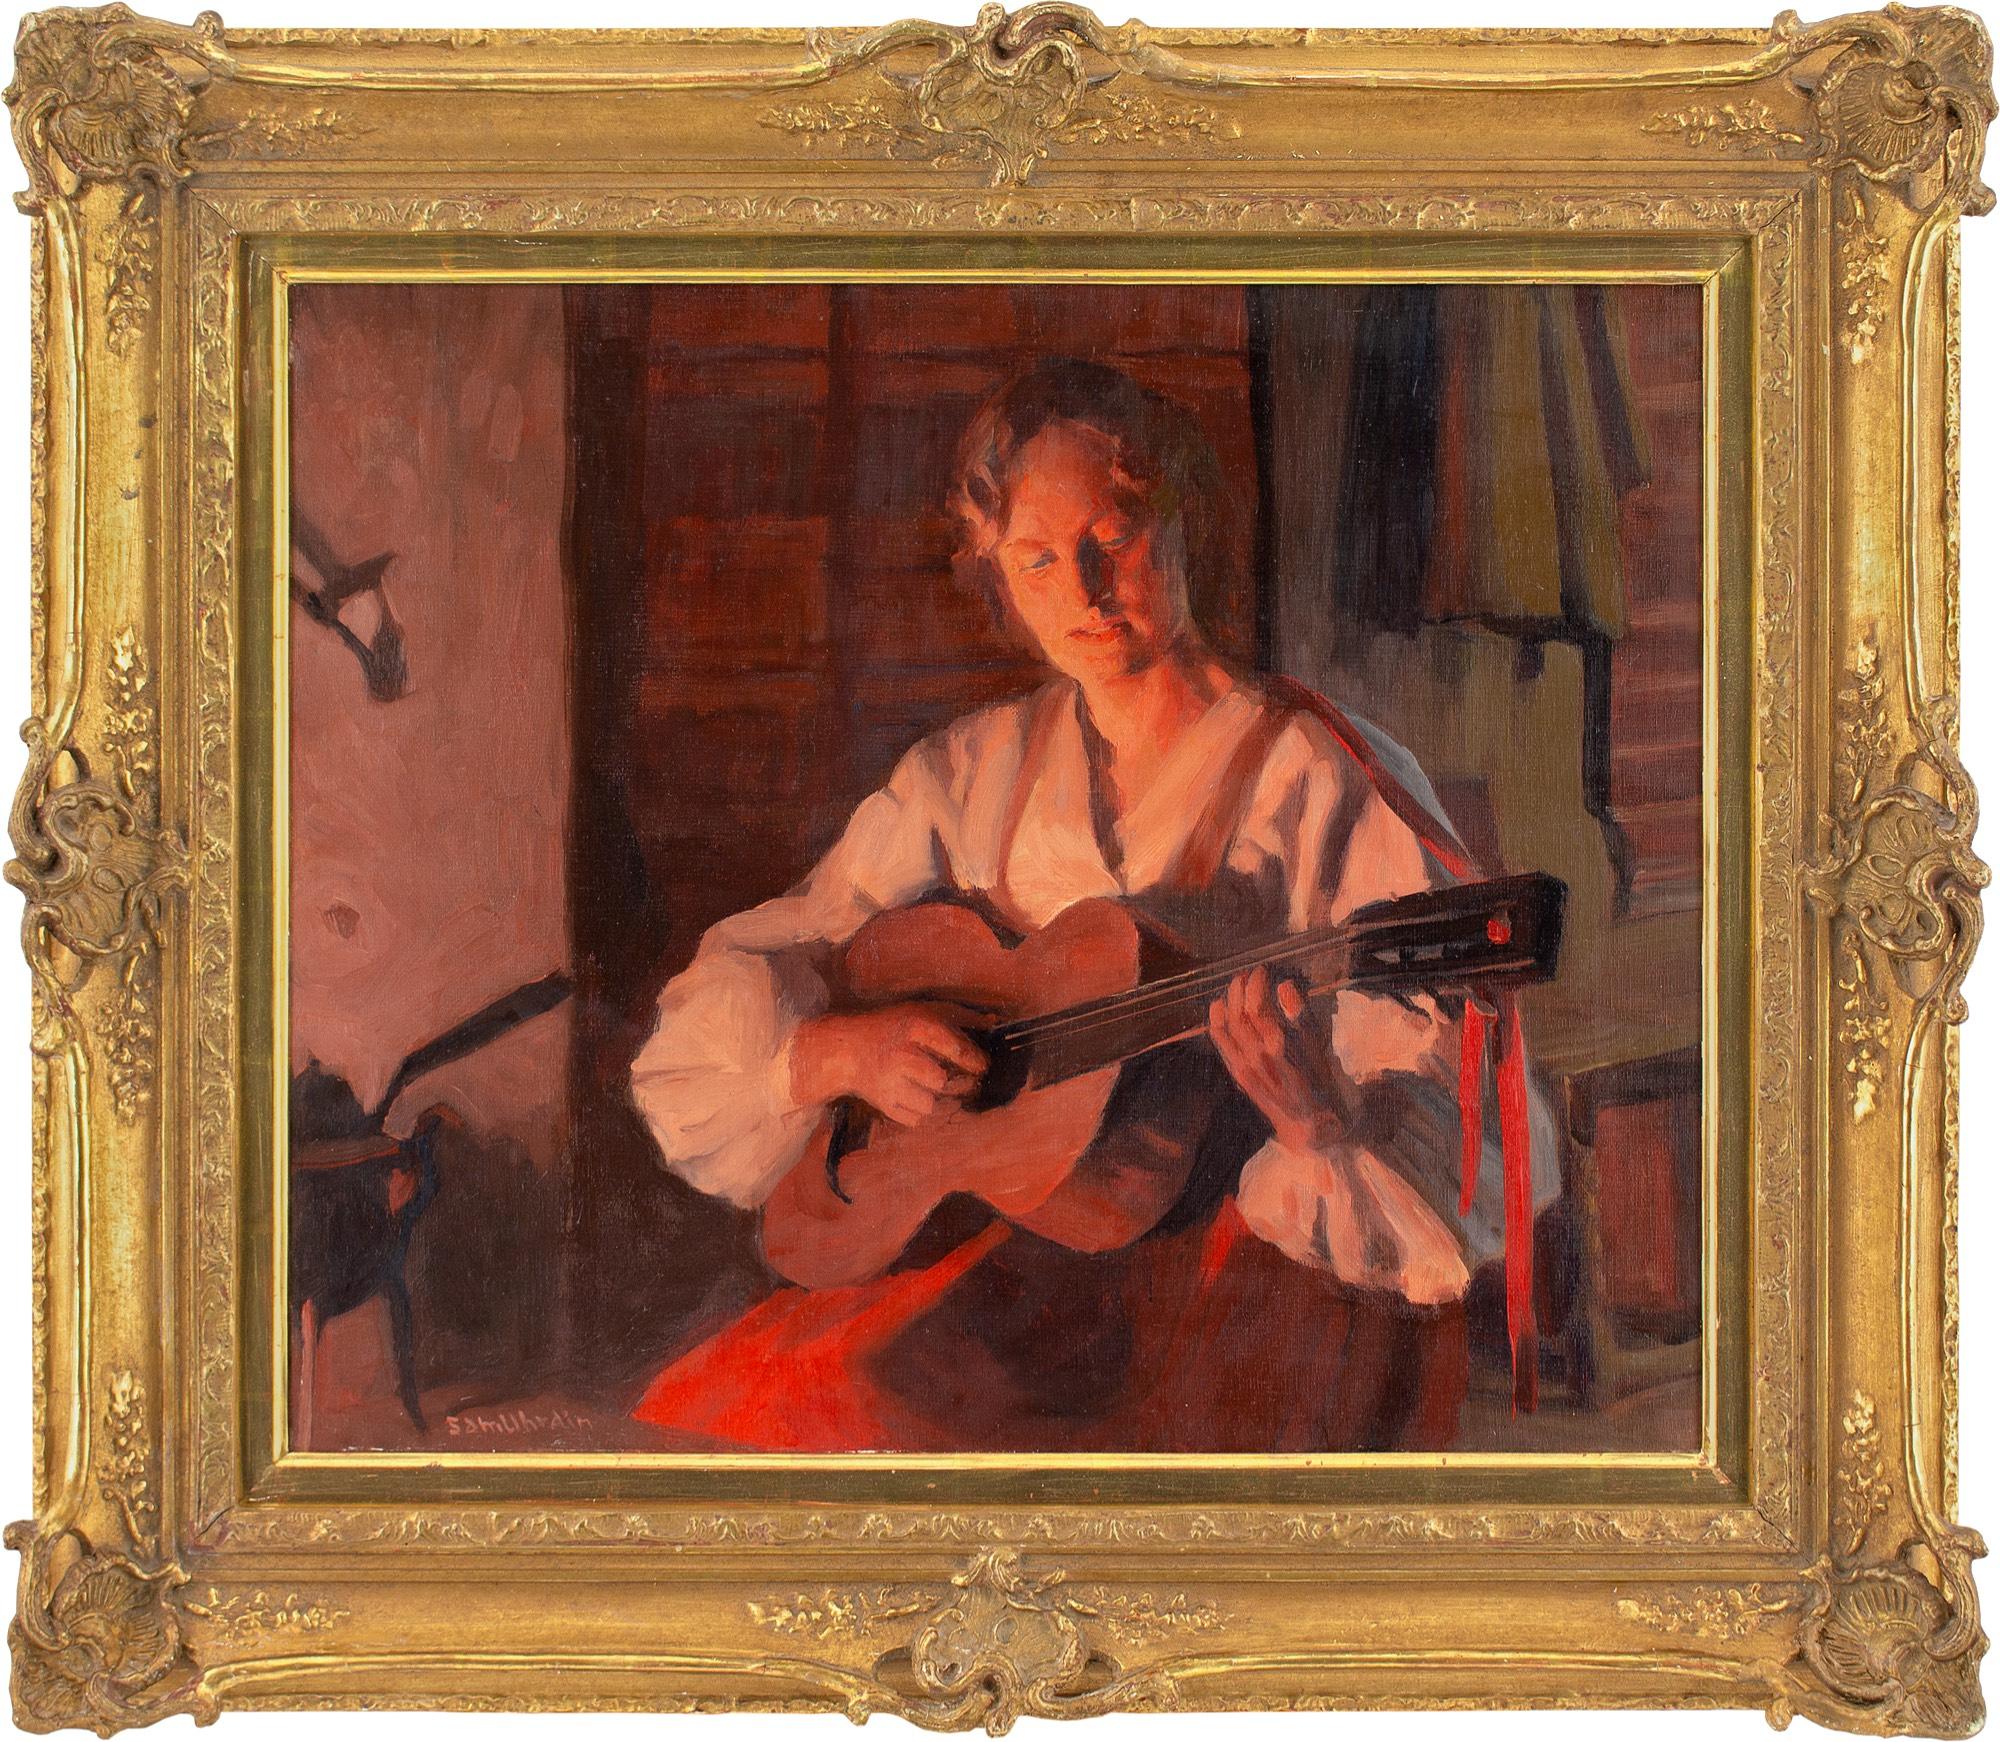 This beautiful mid-20th-century oil painting by Swedish artist Sam Uhrdin (1886-1964) depicts a woman playing the guitar in a gently lit room at twilight.

Bathed in a warm radiance emanating from a cottage fireplace, she serenades the family with